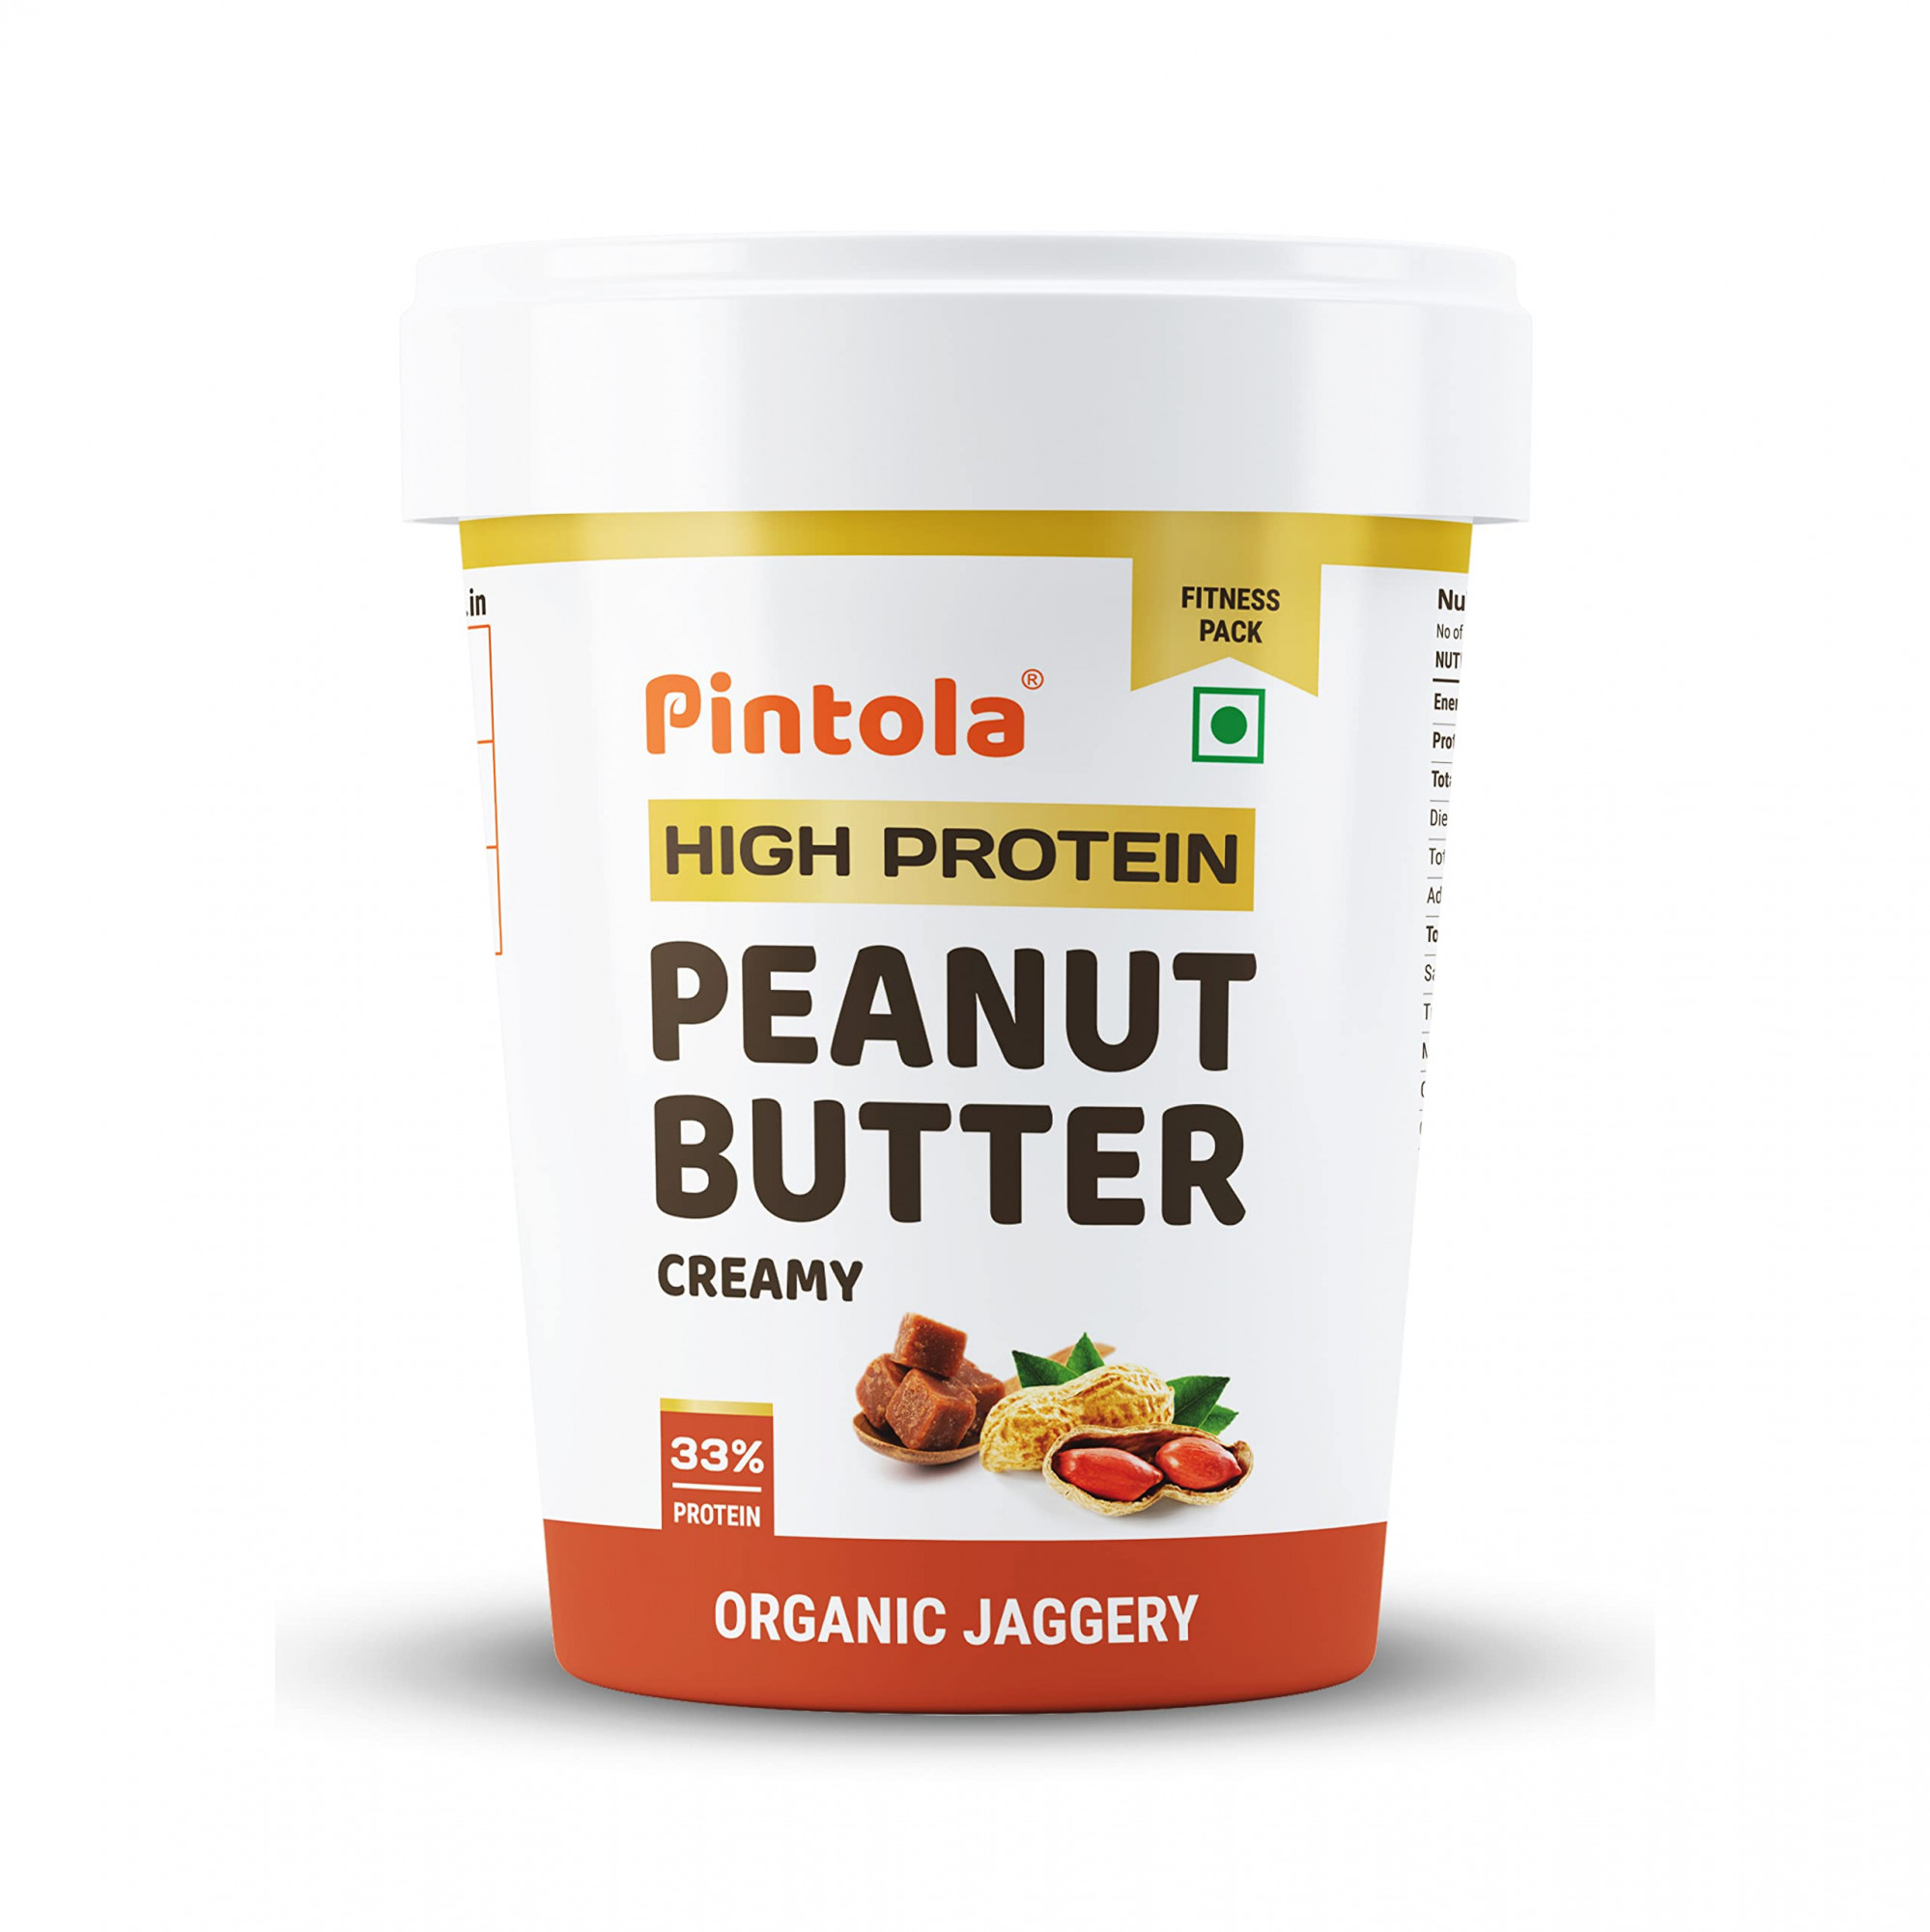 Pintola All Natural Peanut Butter (Crunchy), Unsweetened